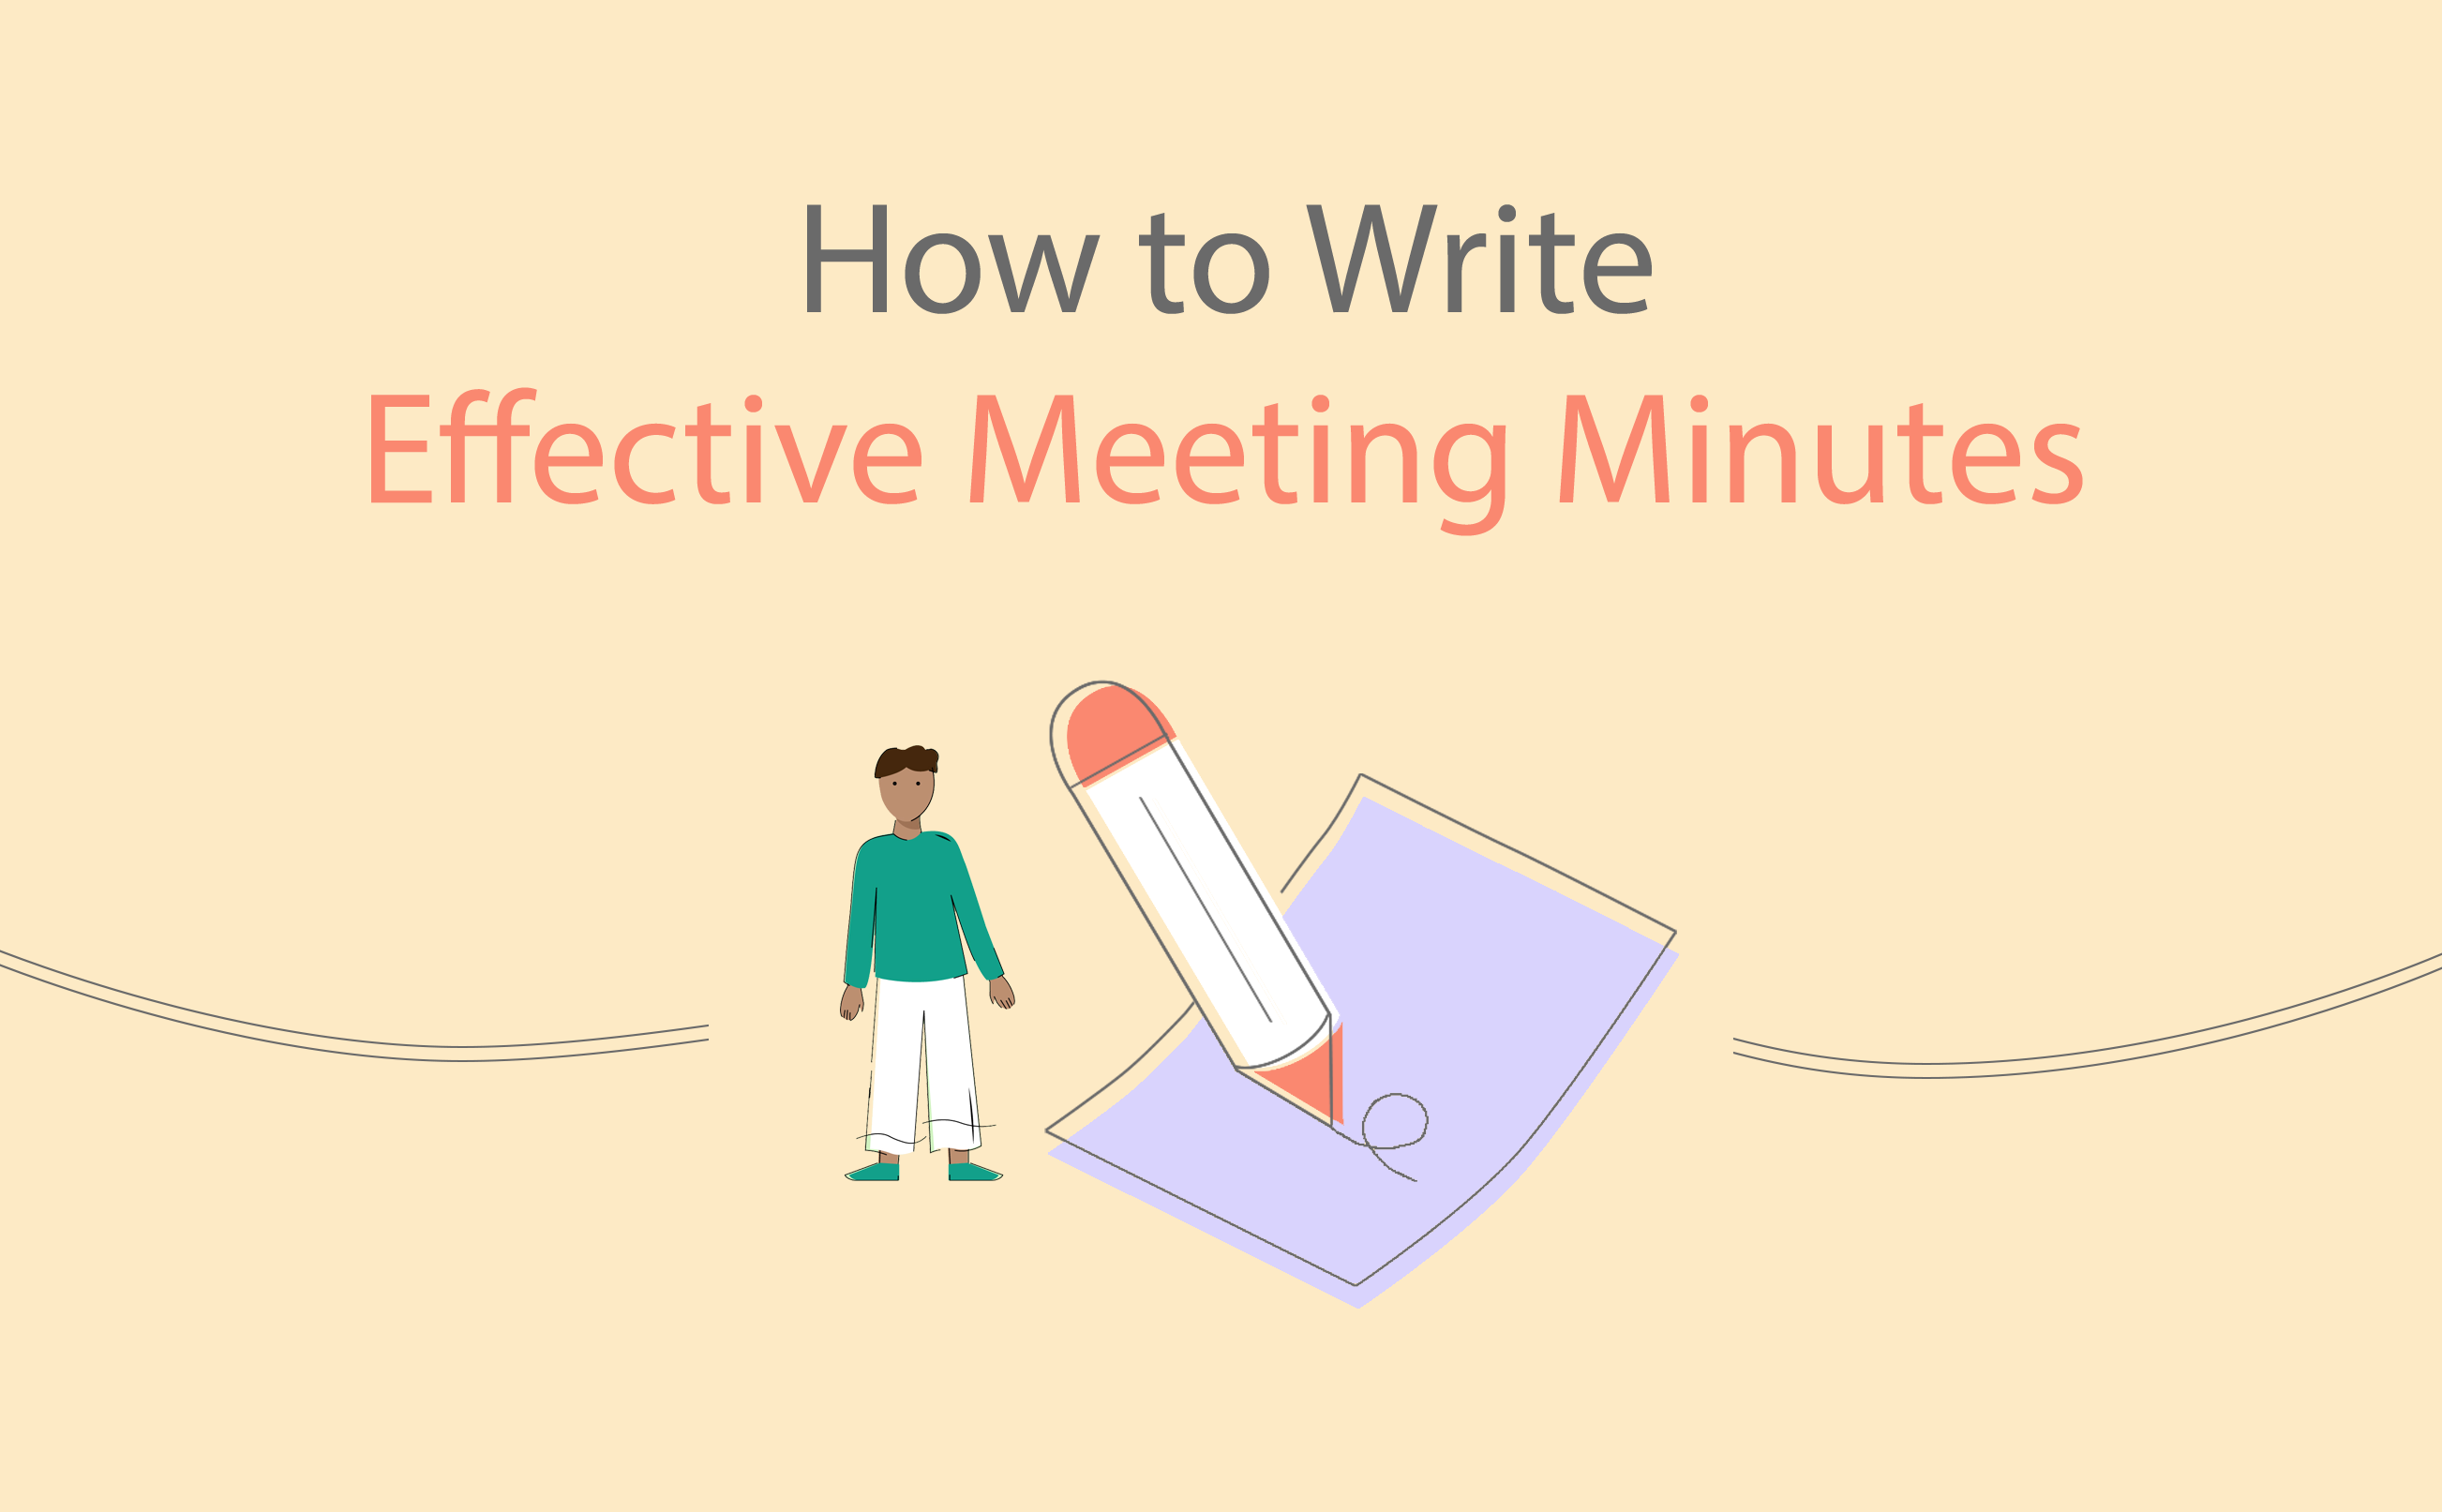 Taking accurate meeting minutes during a board meeting is a crucial and rewarding task. Board meeting minutes are more than just a summary of the board's deliberations; they also serve as an official and legal record of the meeting.